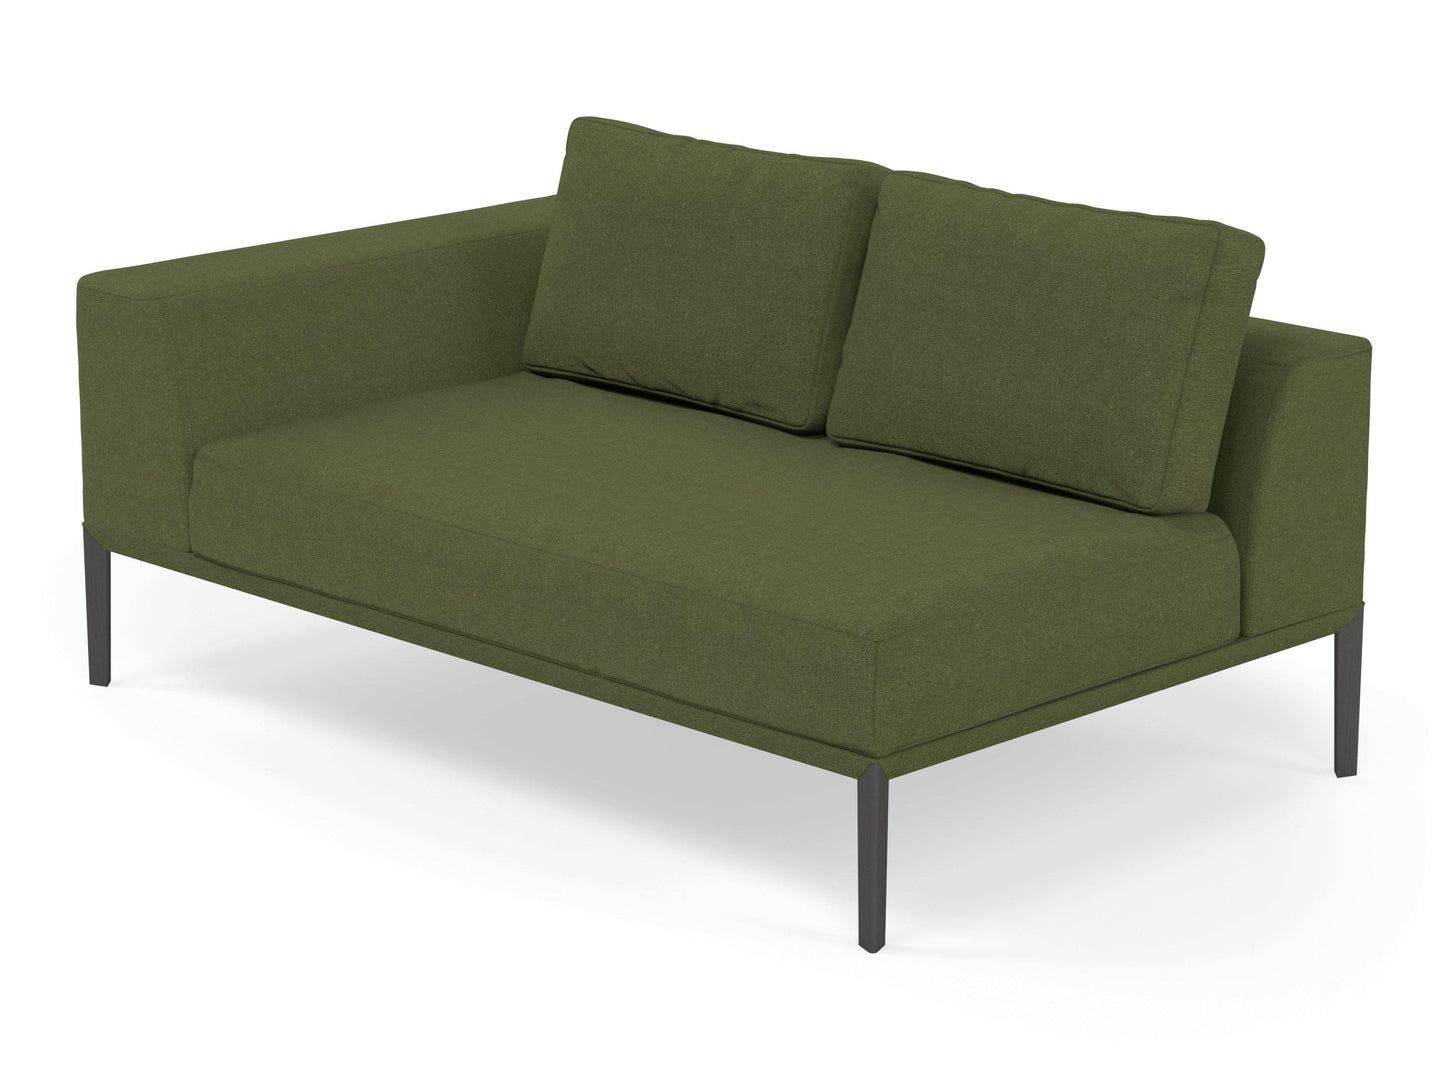 Modern 2 Seater Chaise Lounge Style Sofa with Right Armrest in Seaweed Green Fabric-Distinct Designs (London) Ltd